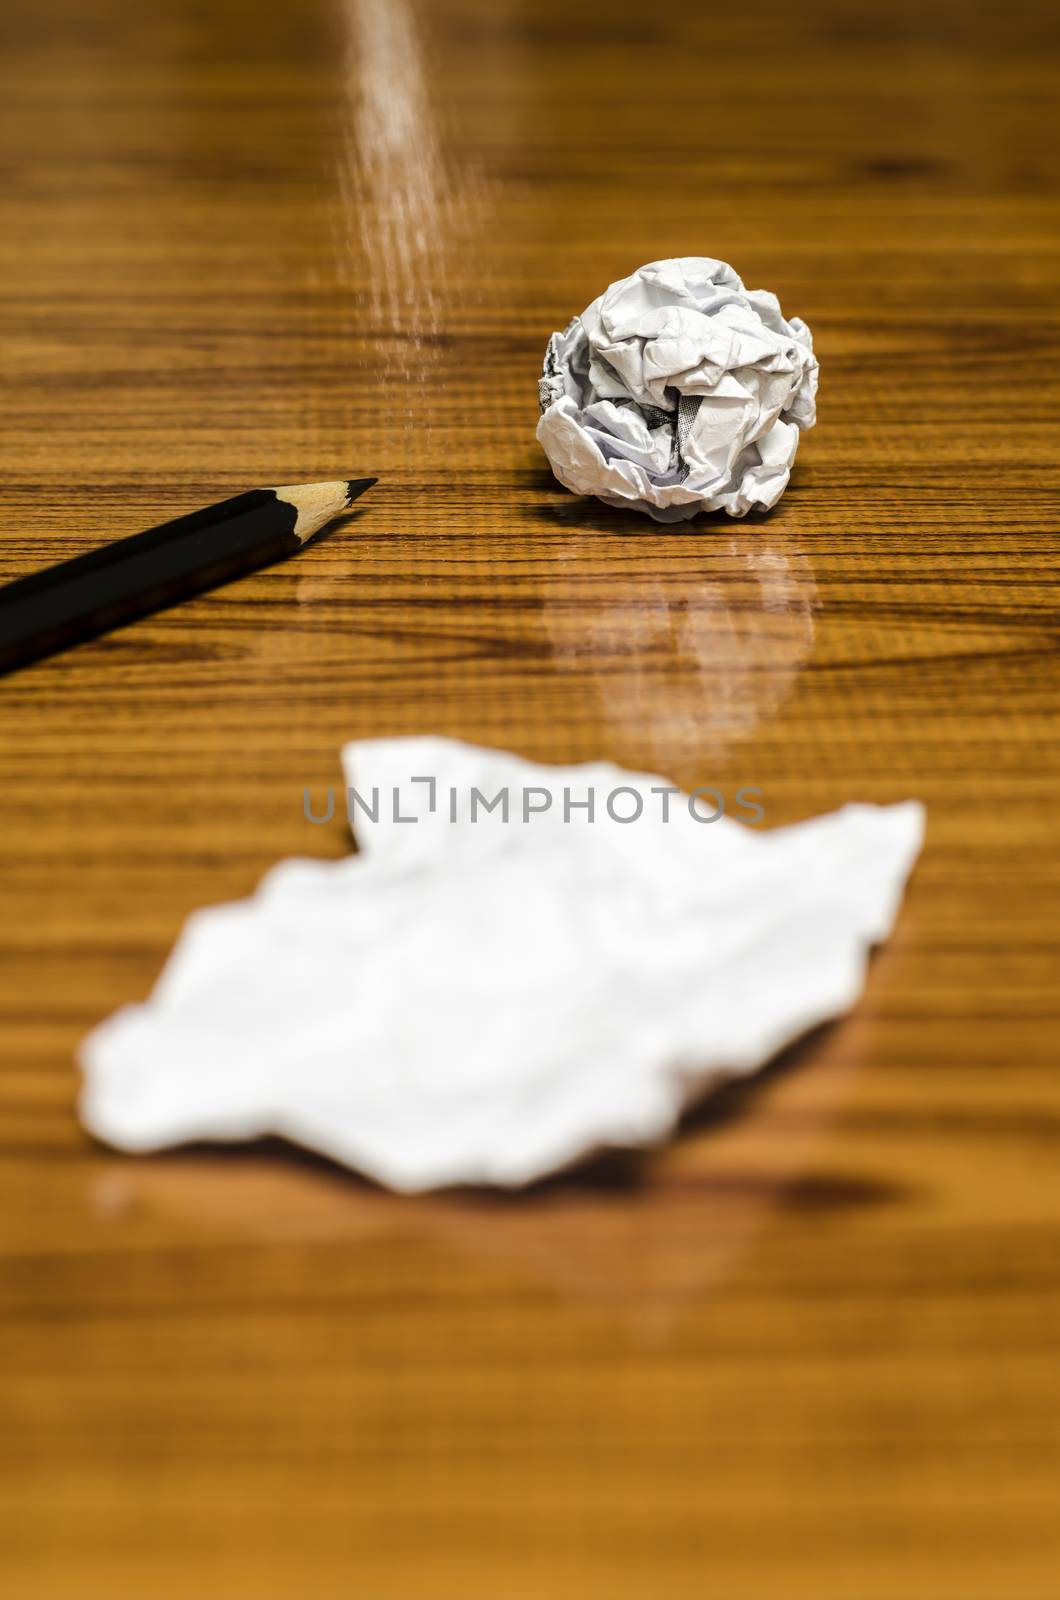 paper scrap and crumpled with pencil by ammza12